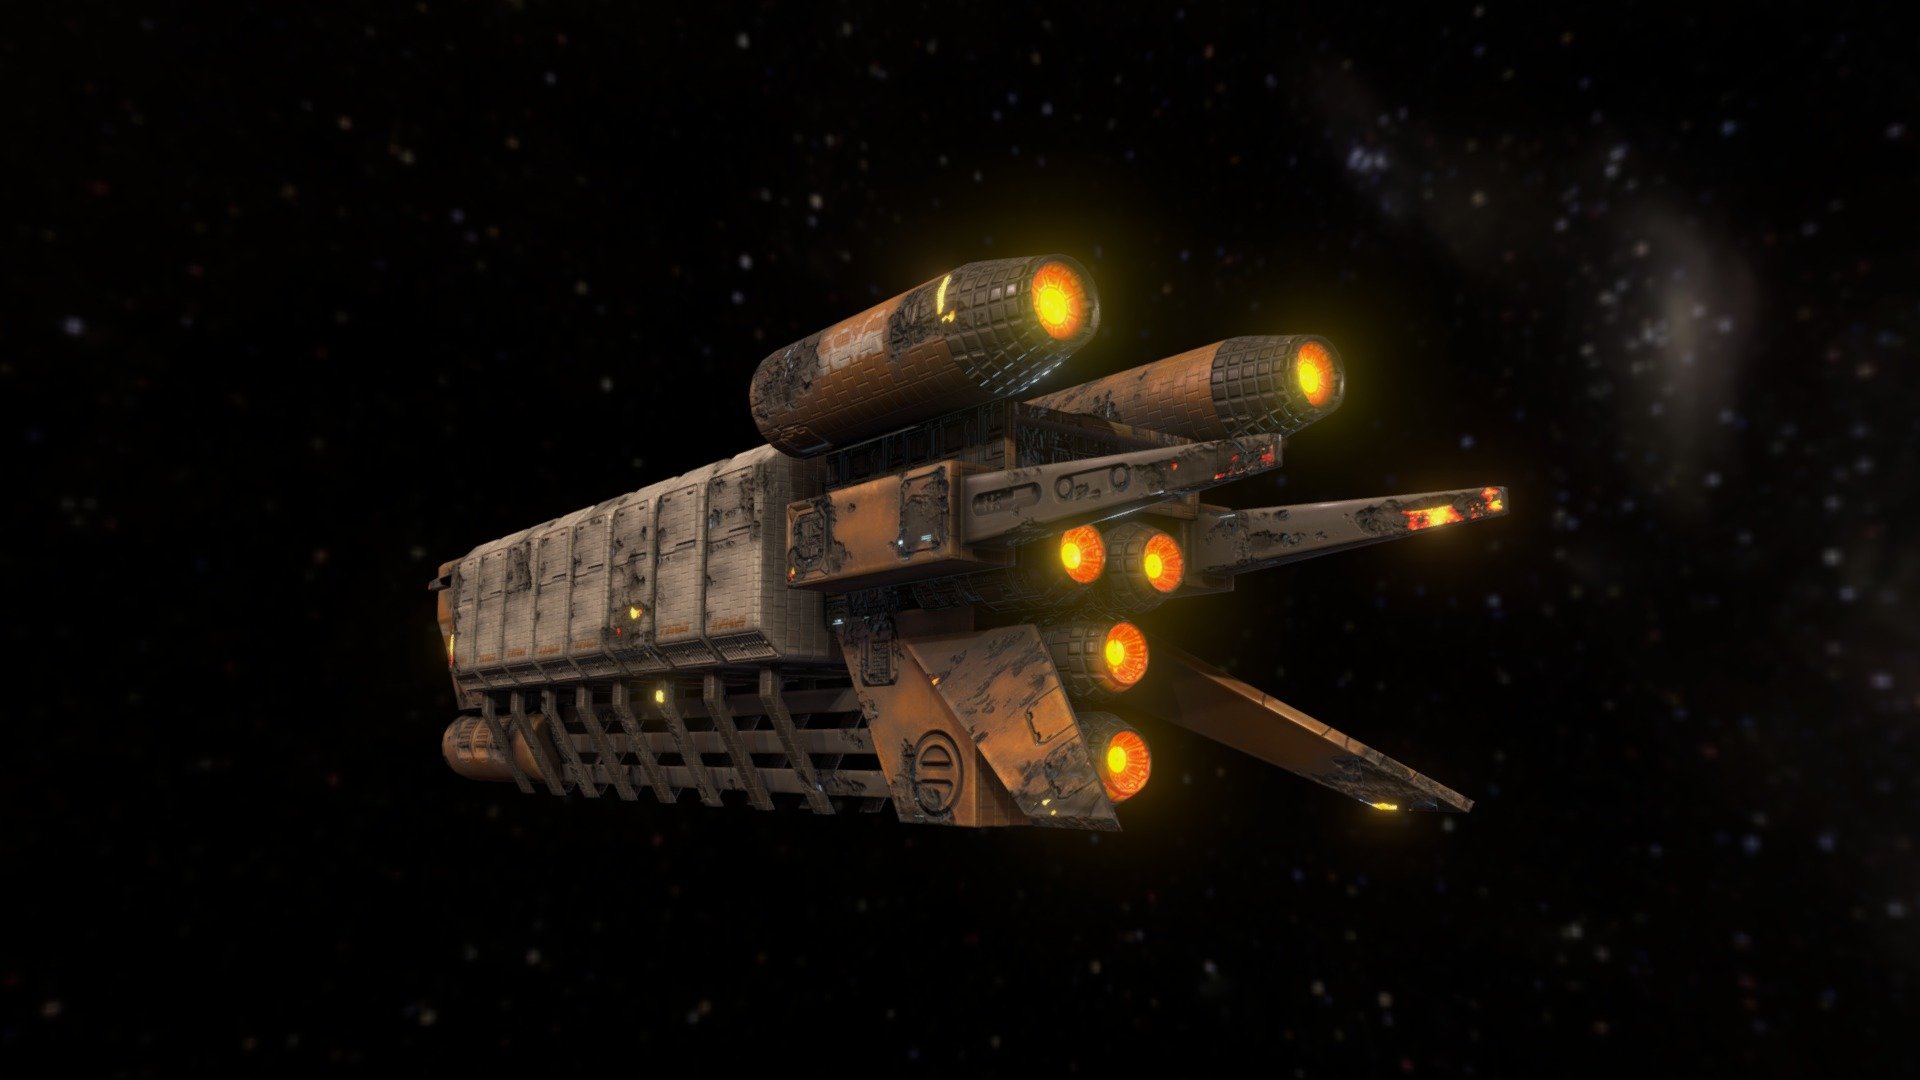 A big, burning mess of an interplanetary freighter ship. It's low-res since it will likely not be seen up close.

Made with 3DSMax and Substance Painter 3d model